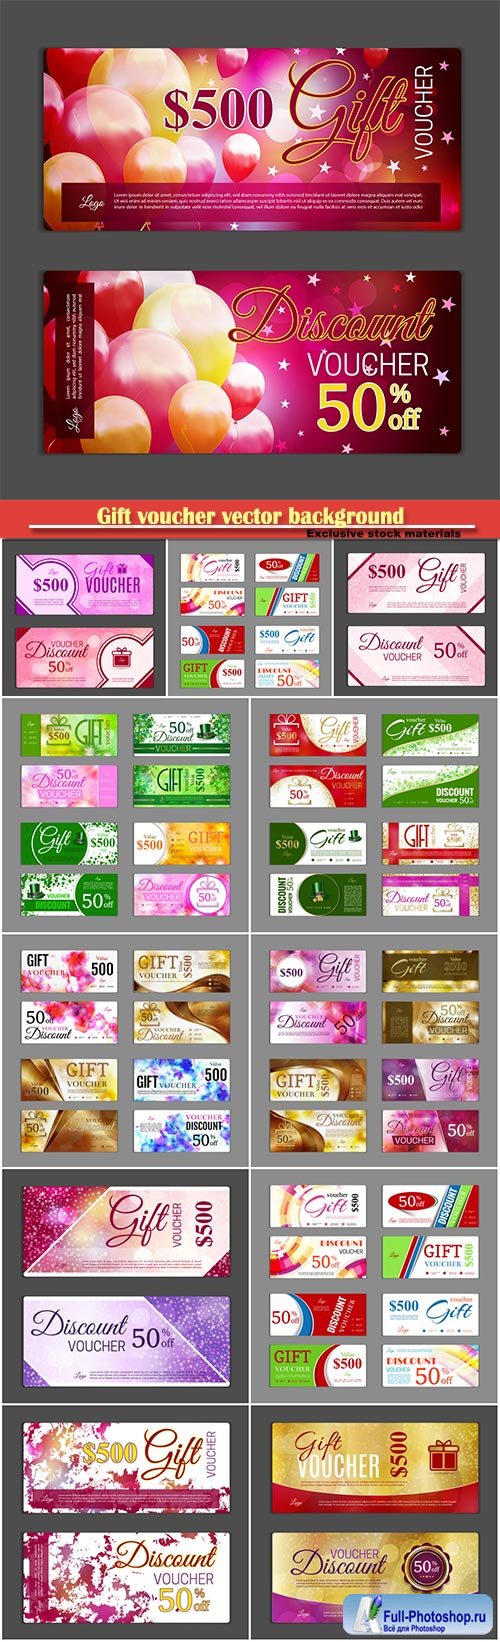 Gift voucher vector background, shopping cards, discount coupon, banner, discount card # 7